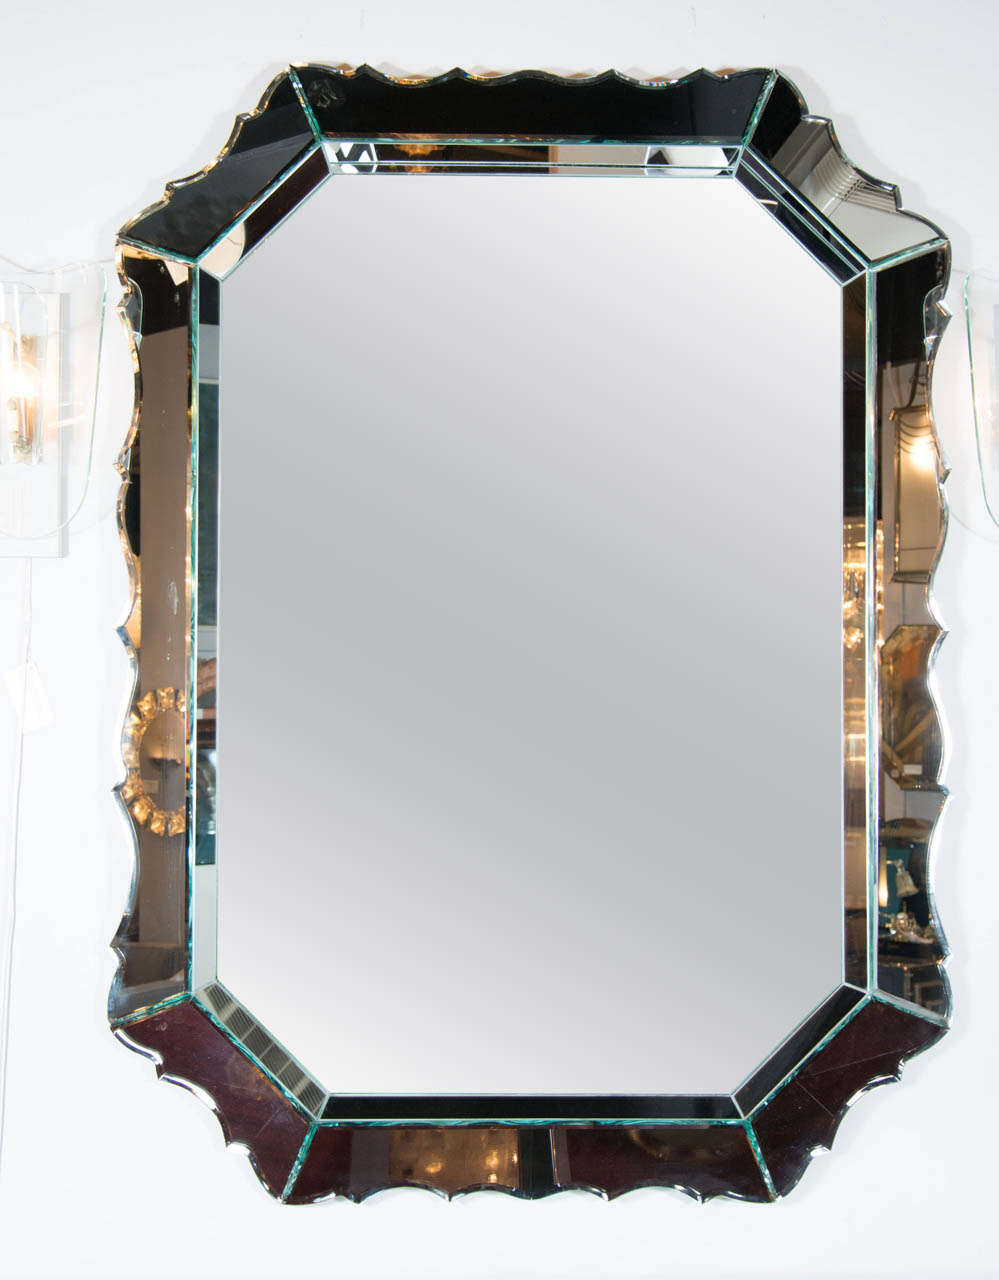 This outstanding 1940's Hollywood shield back mirror features an inset shadow box style octagonal mirror with hand bevelled details.